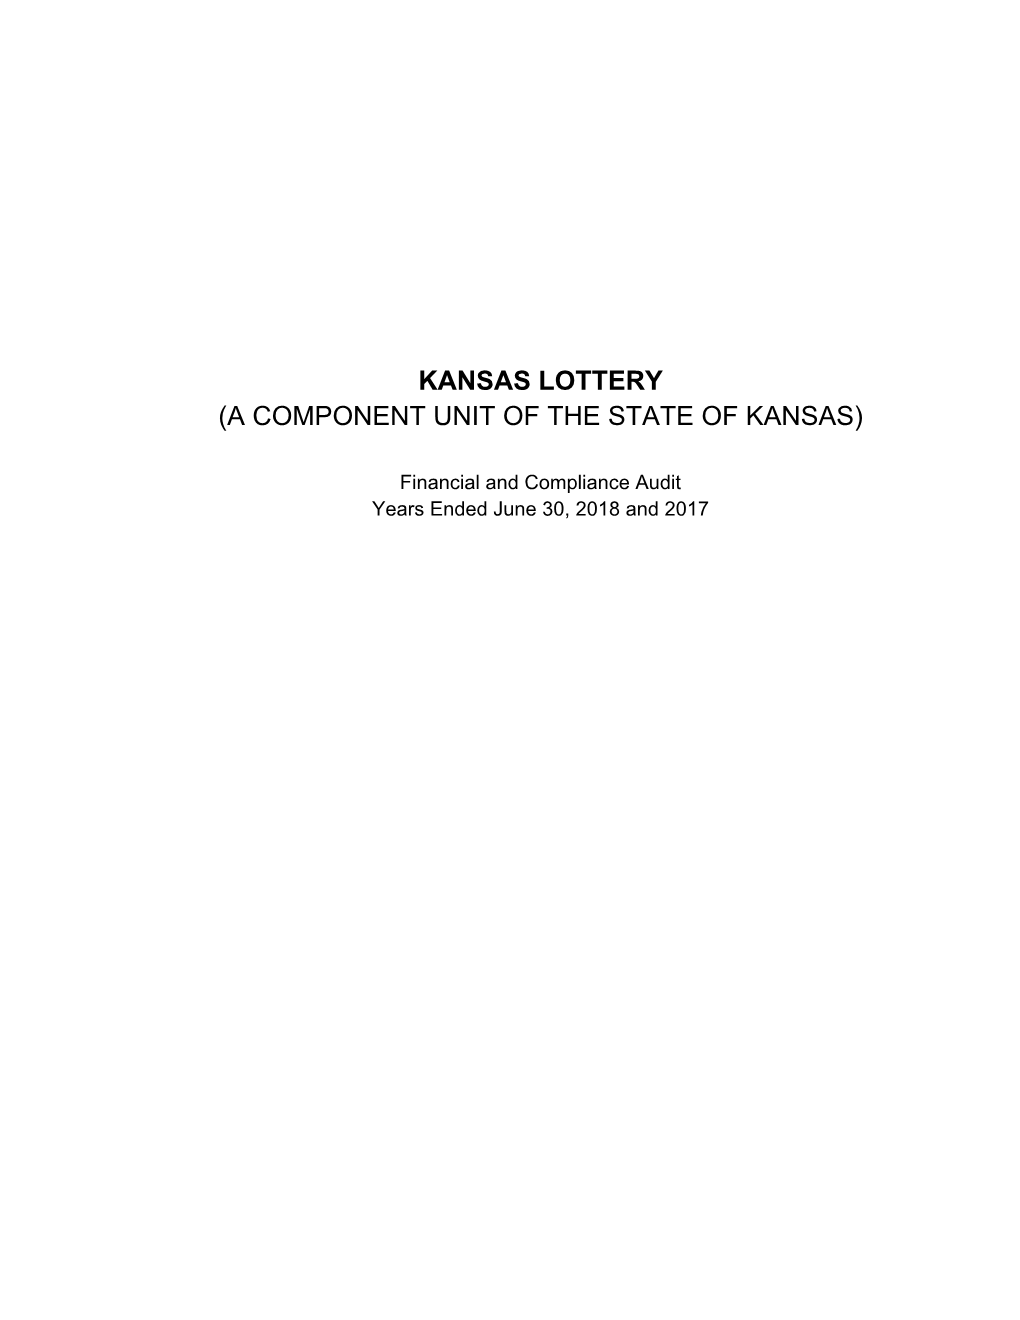 Kansas Lottery (A Component Unit of the State of Kansas)